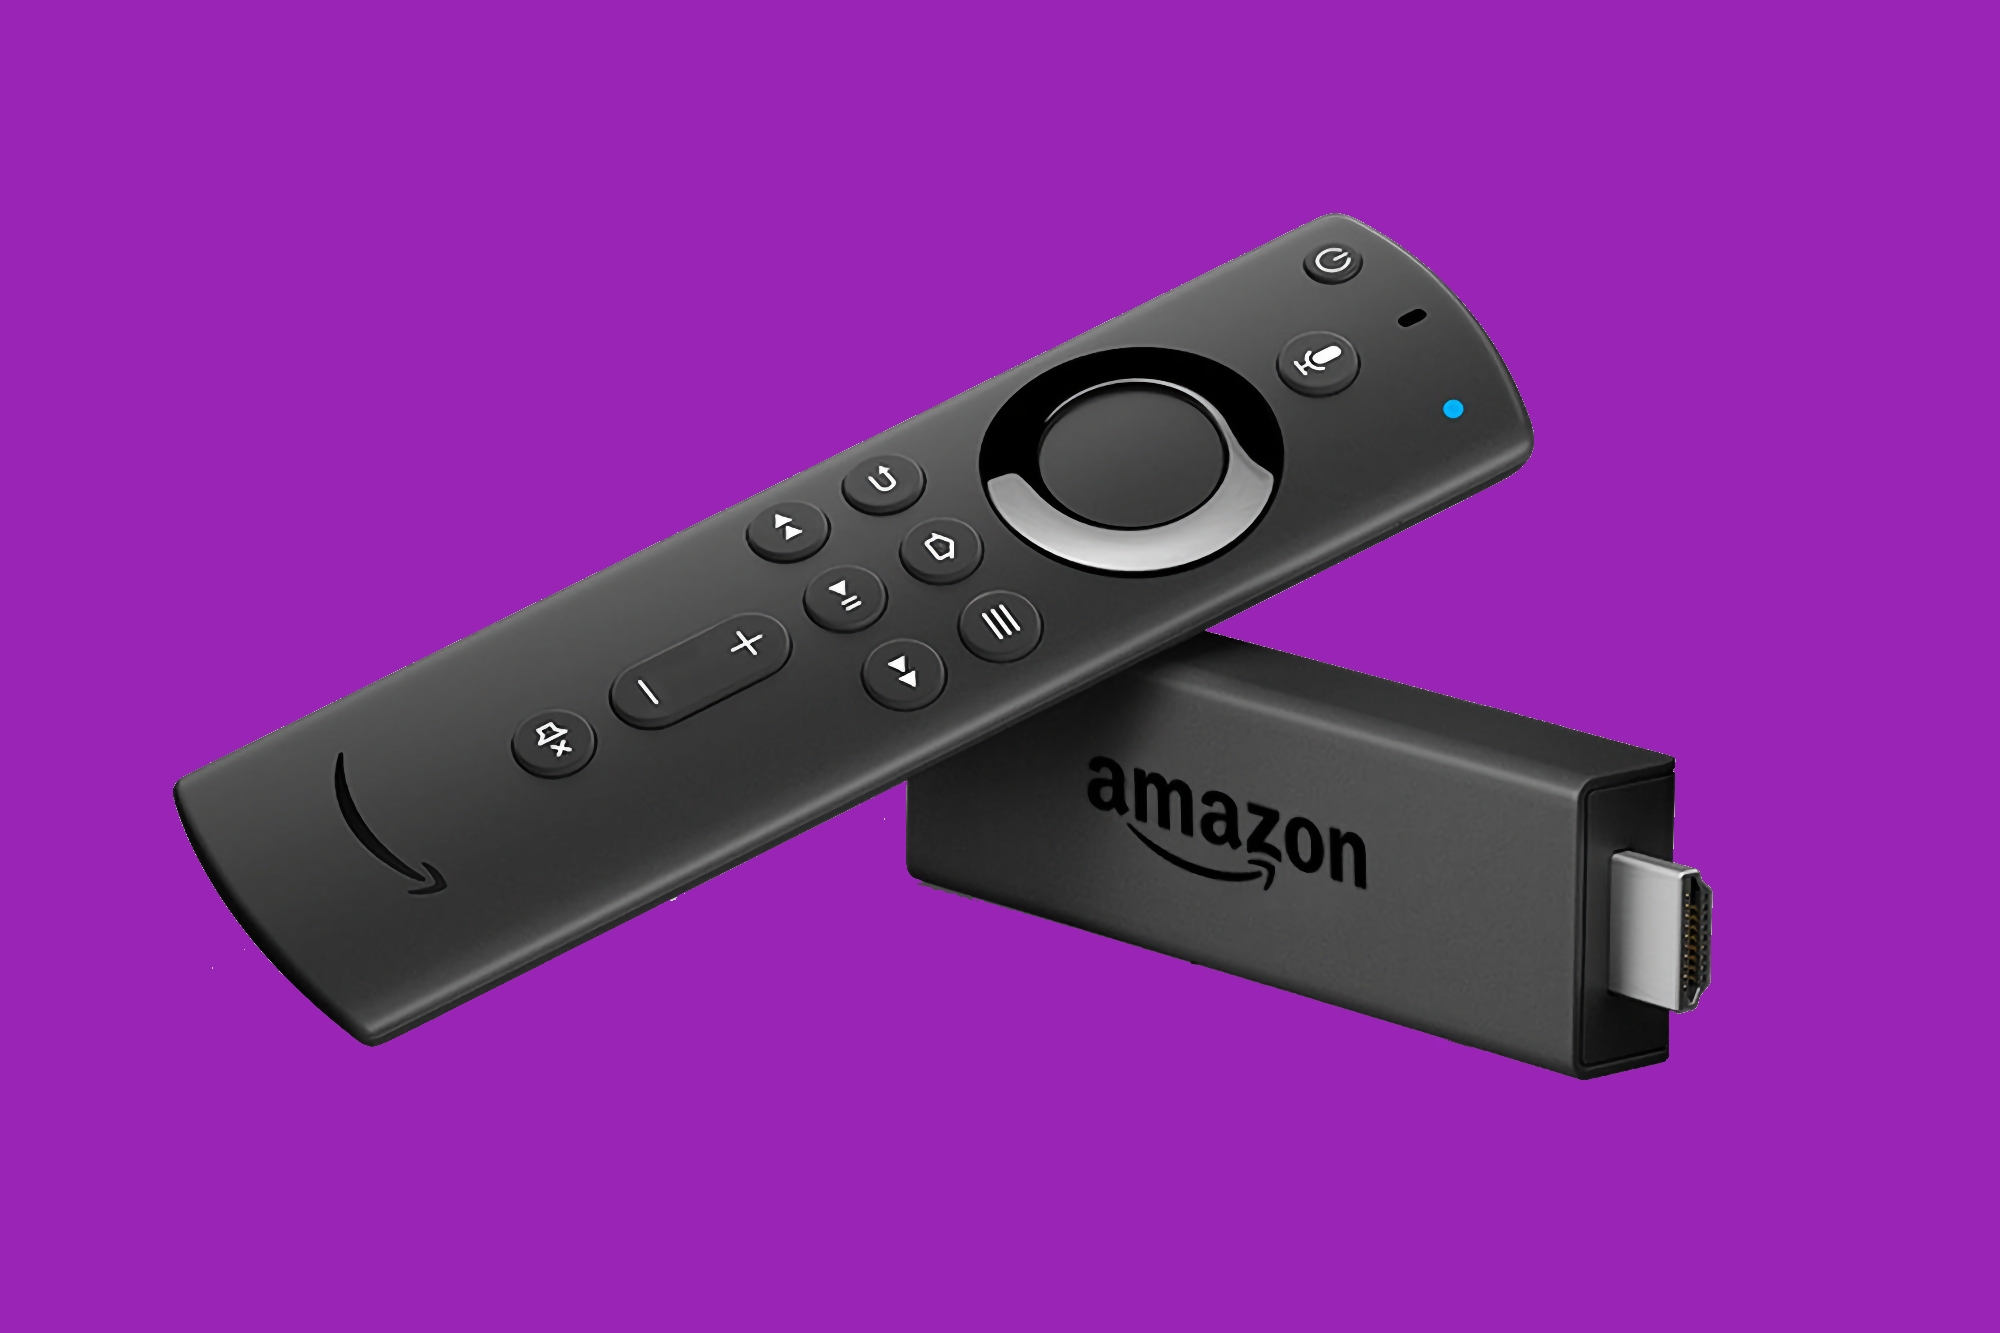 27% off: Fire TV Stick Lite is available on Amazon at a promotional price